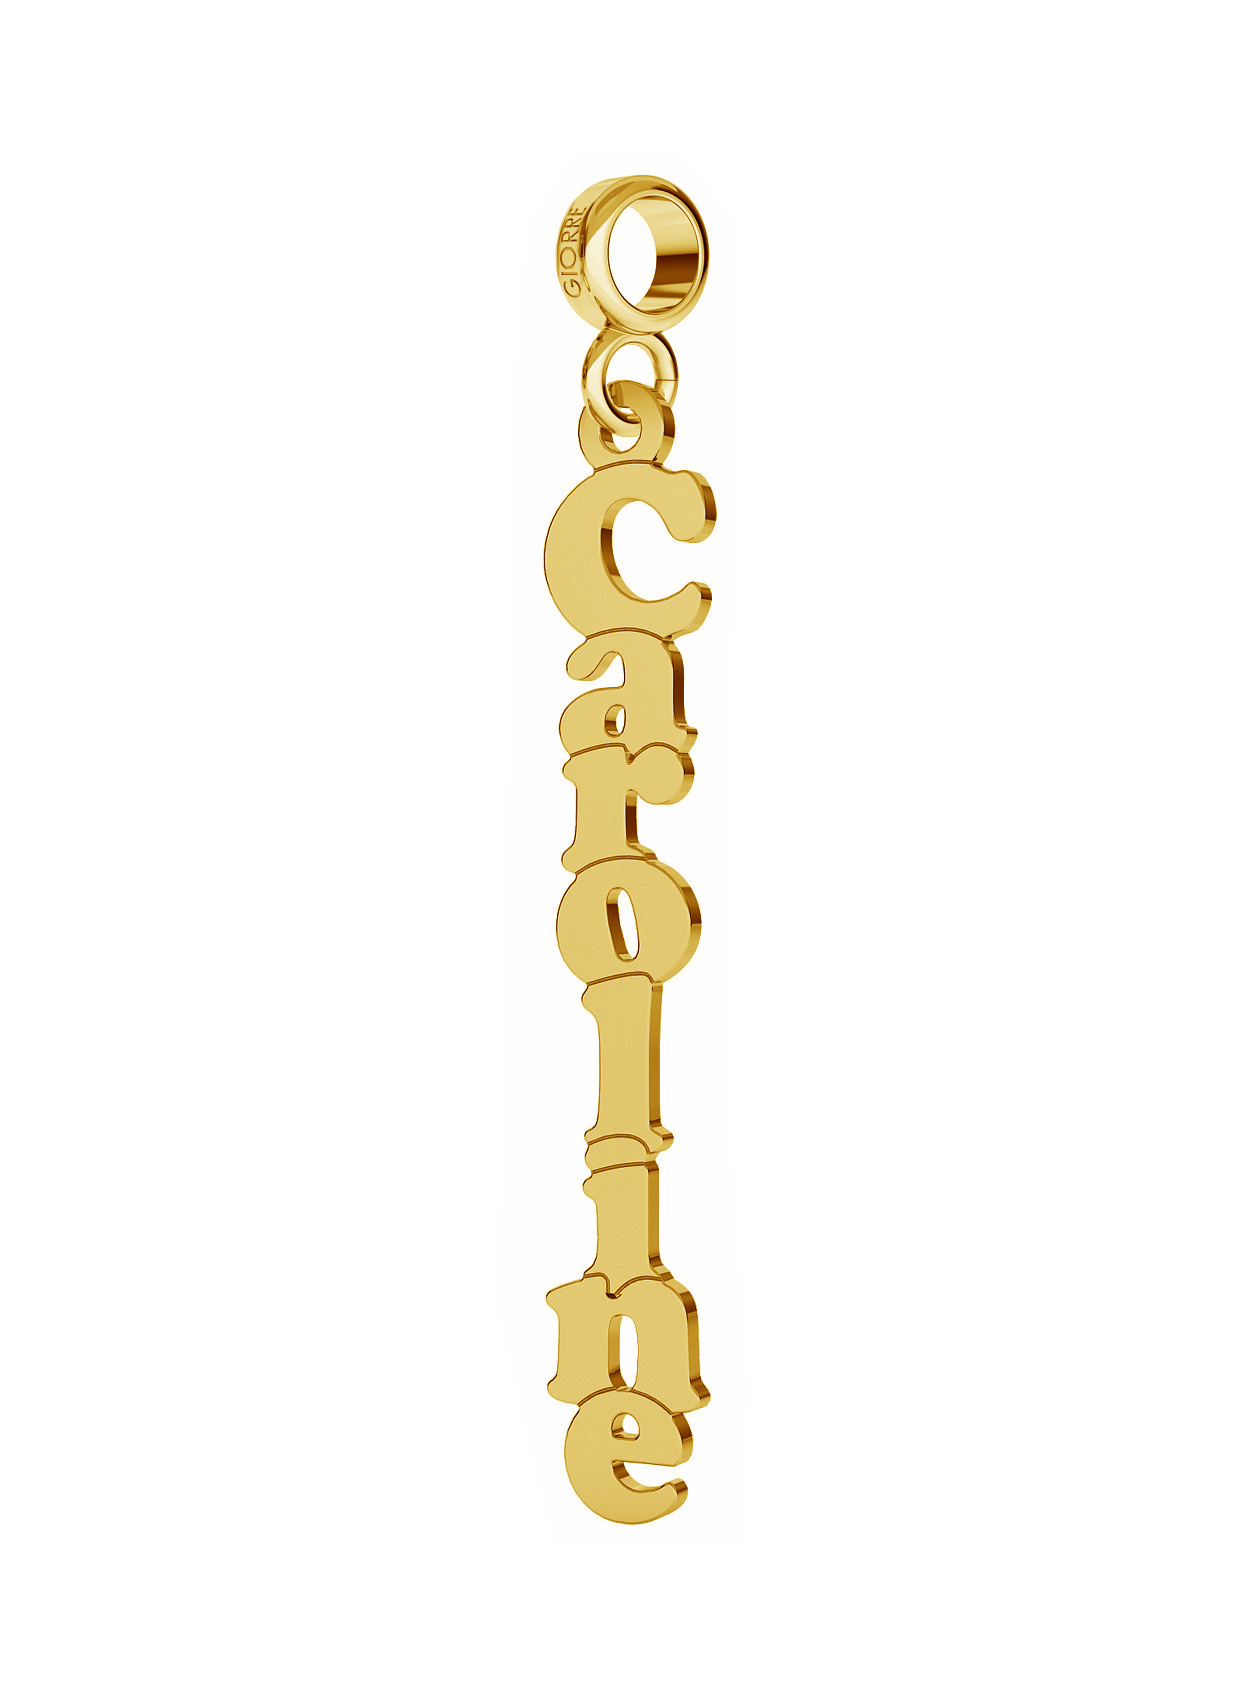 CHARM 126, CARRIE STYLE NAME, RHODIUM OR 24K / 18K GOLD PLATED